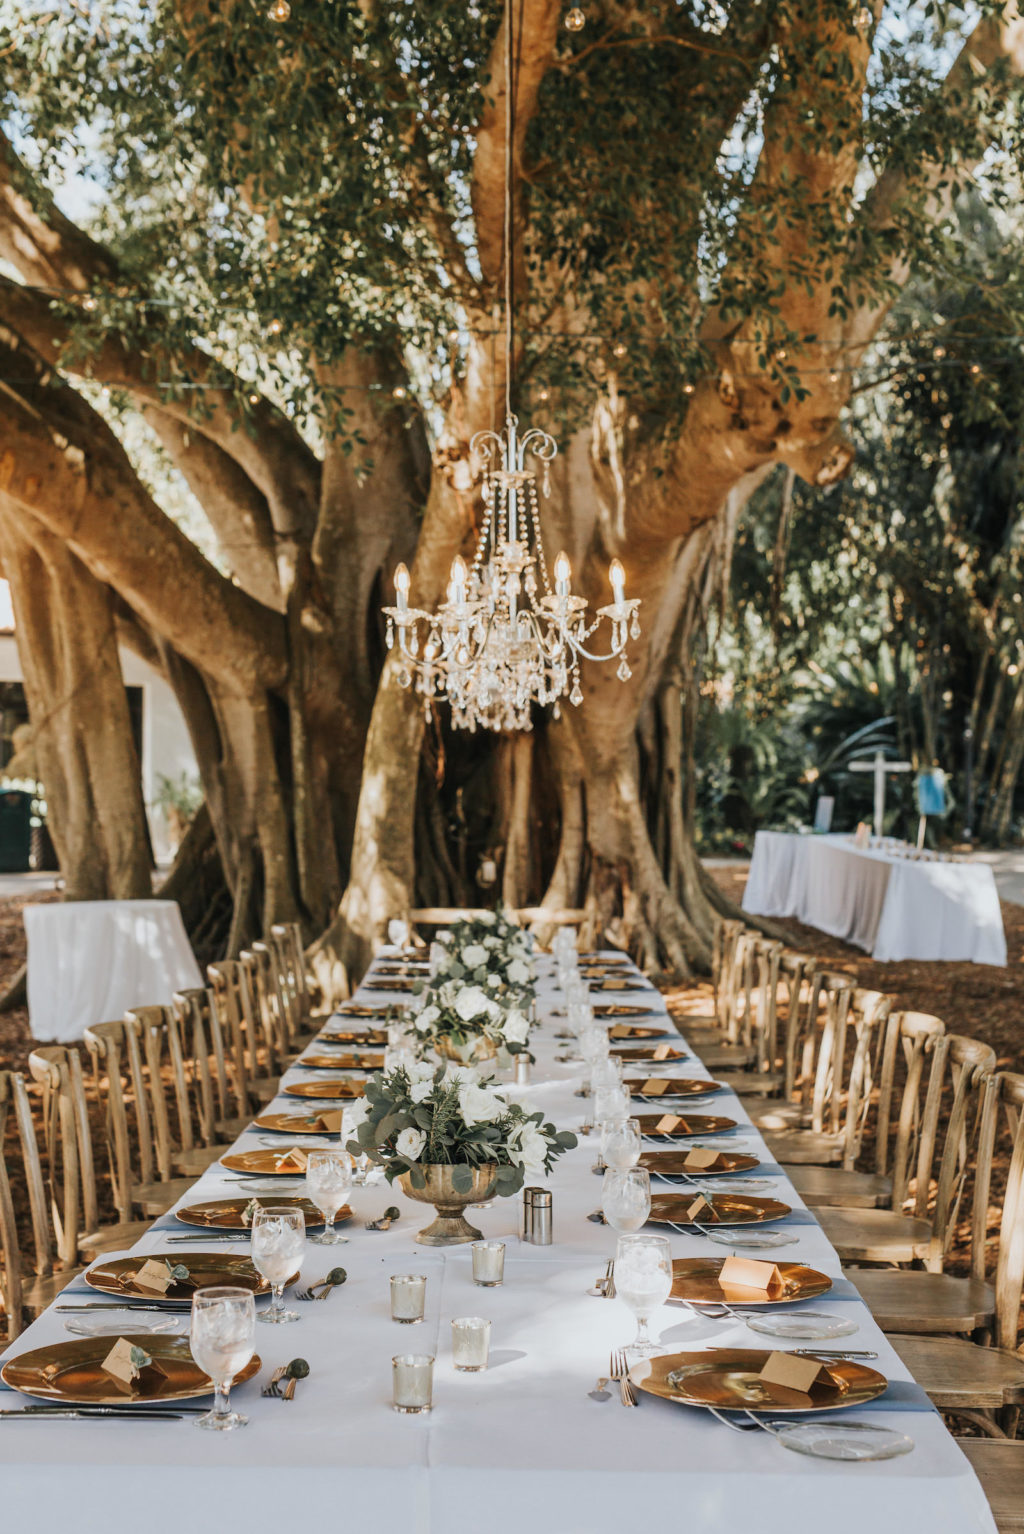 Romantic Rustic Outdoor Garden Wedding Reception | Sarasota Marie Selby Botanical Gardens | Gold Chargers and French Country Wooden Reception Chairs | Crystal Chandeliers Hanging from Trees | Sarasota Wedding Planner Taylored Affairs